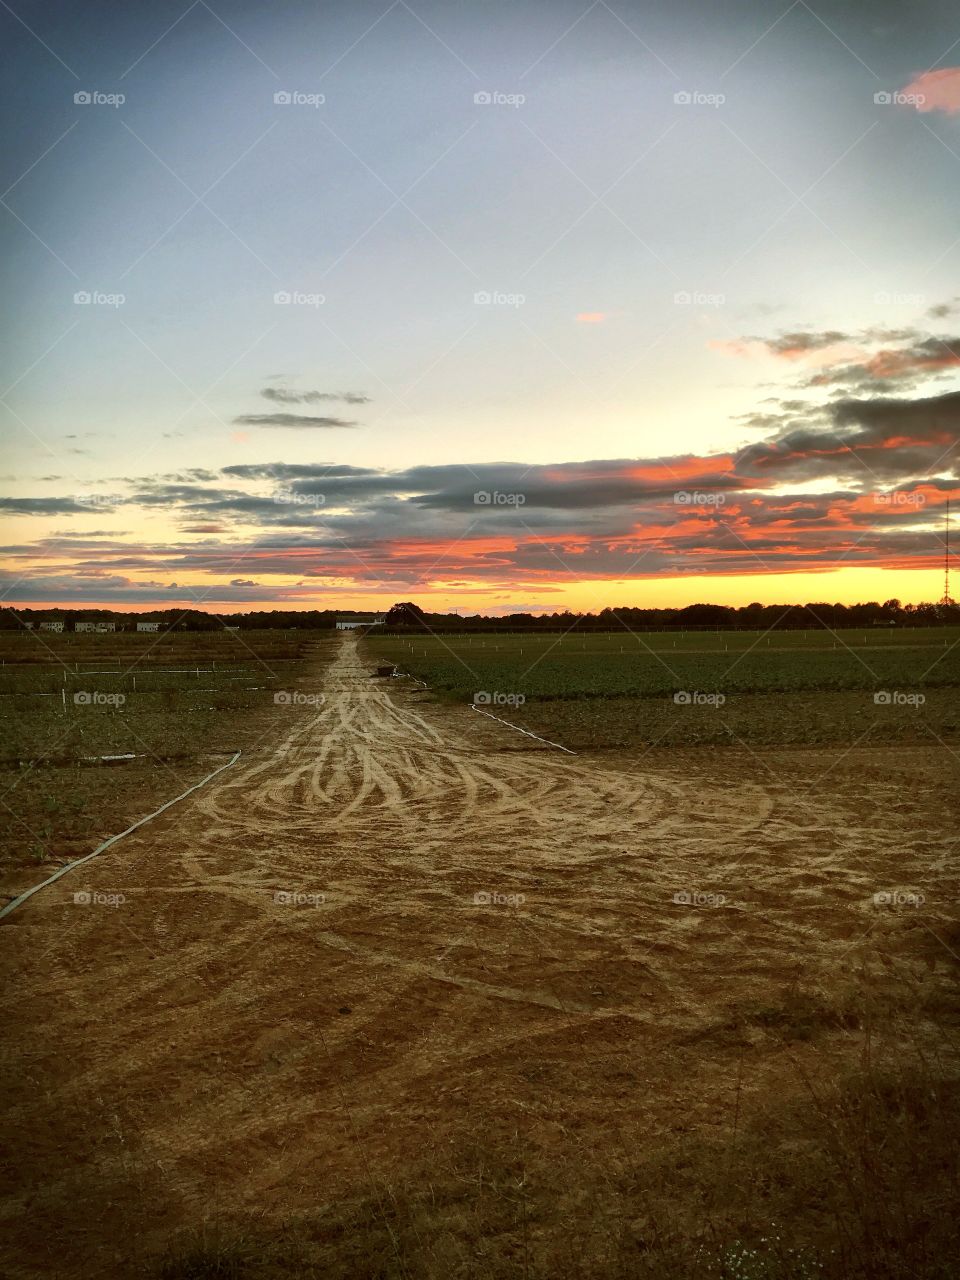 A farm road at sunset